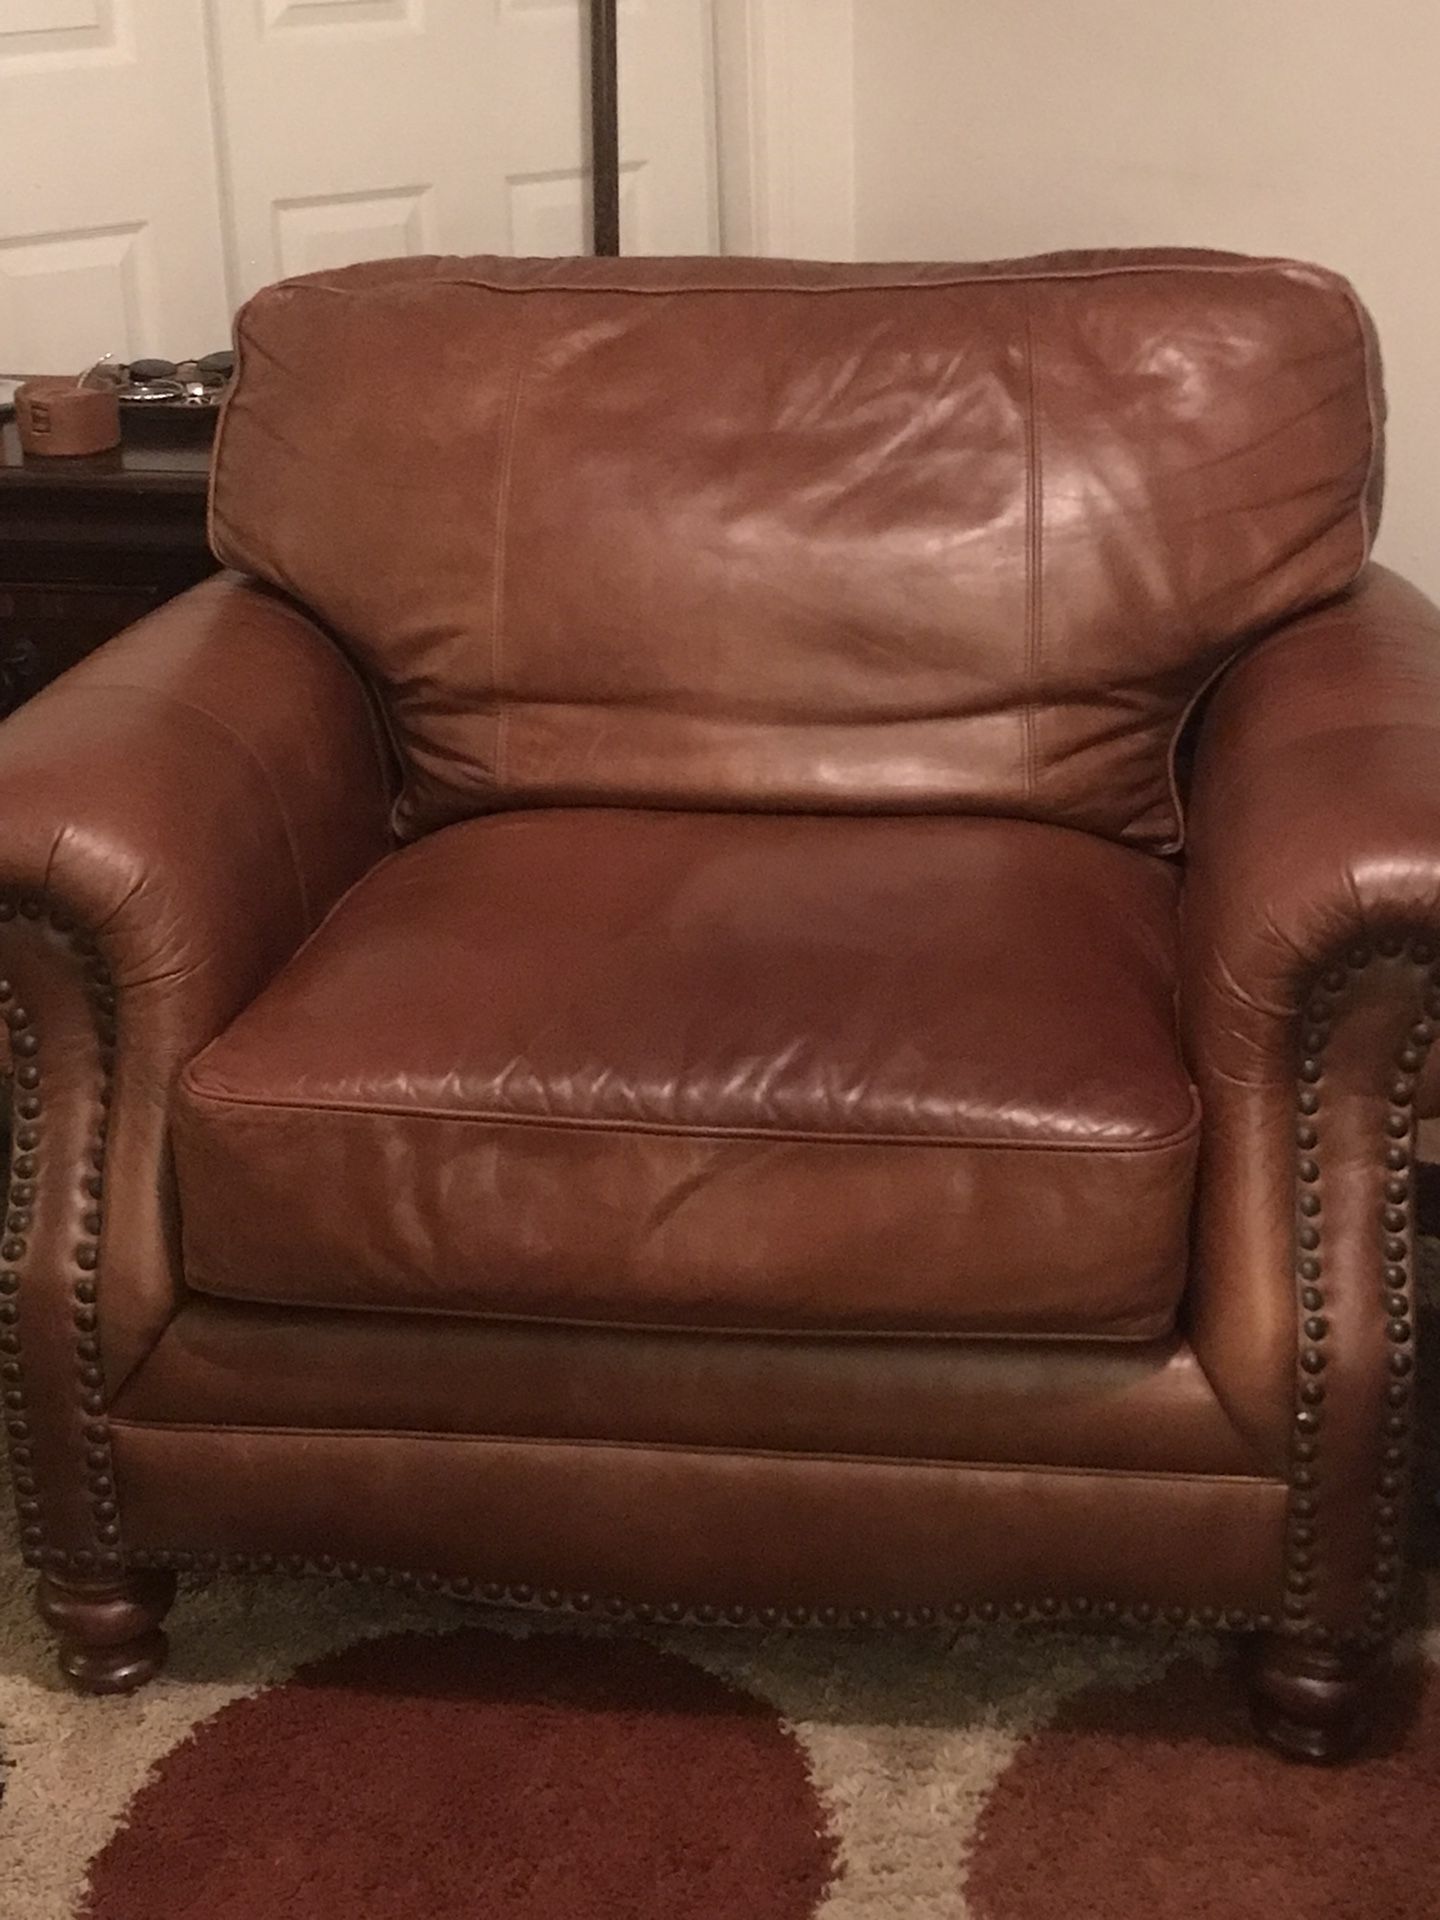 Beautiful Leather Oversized Chair $400